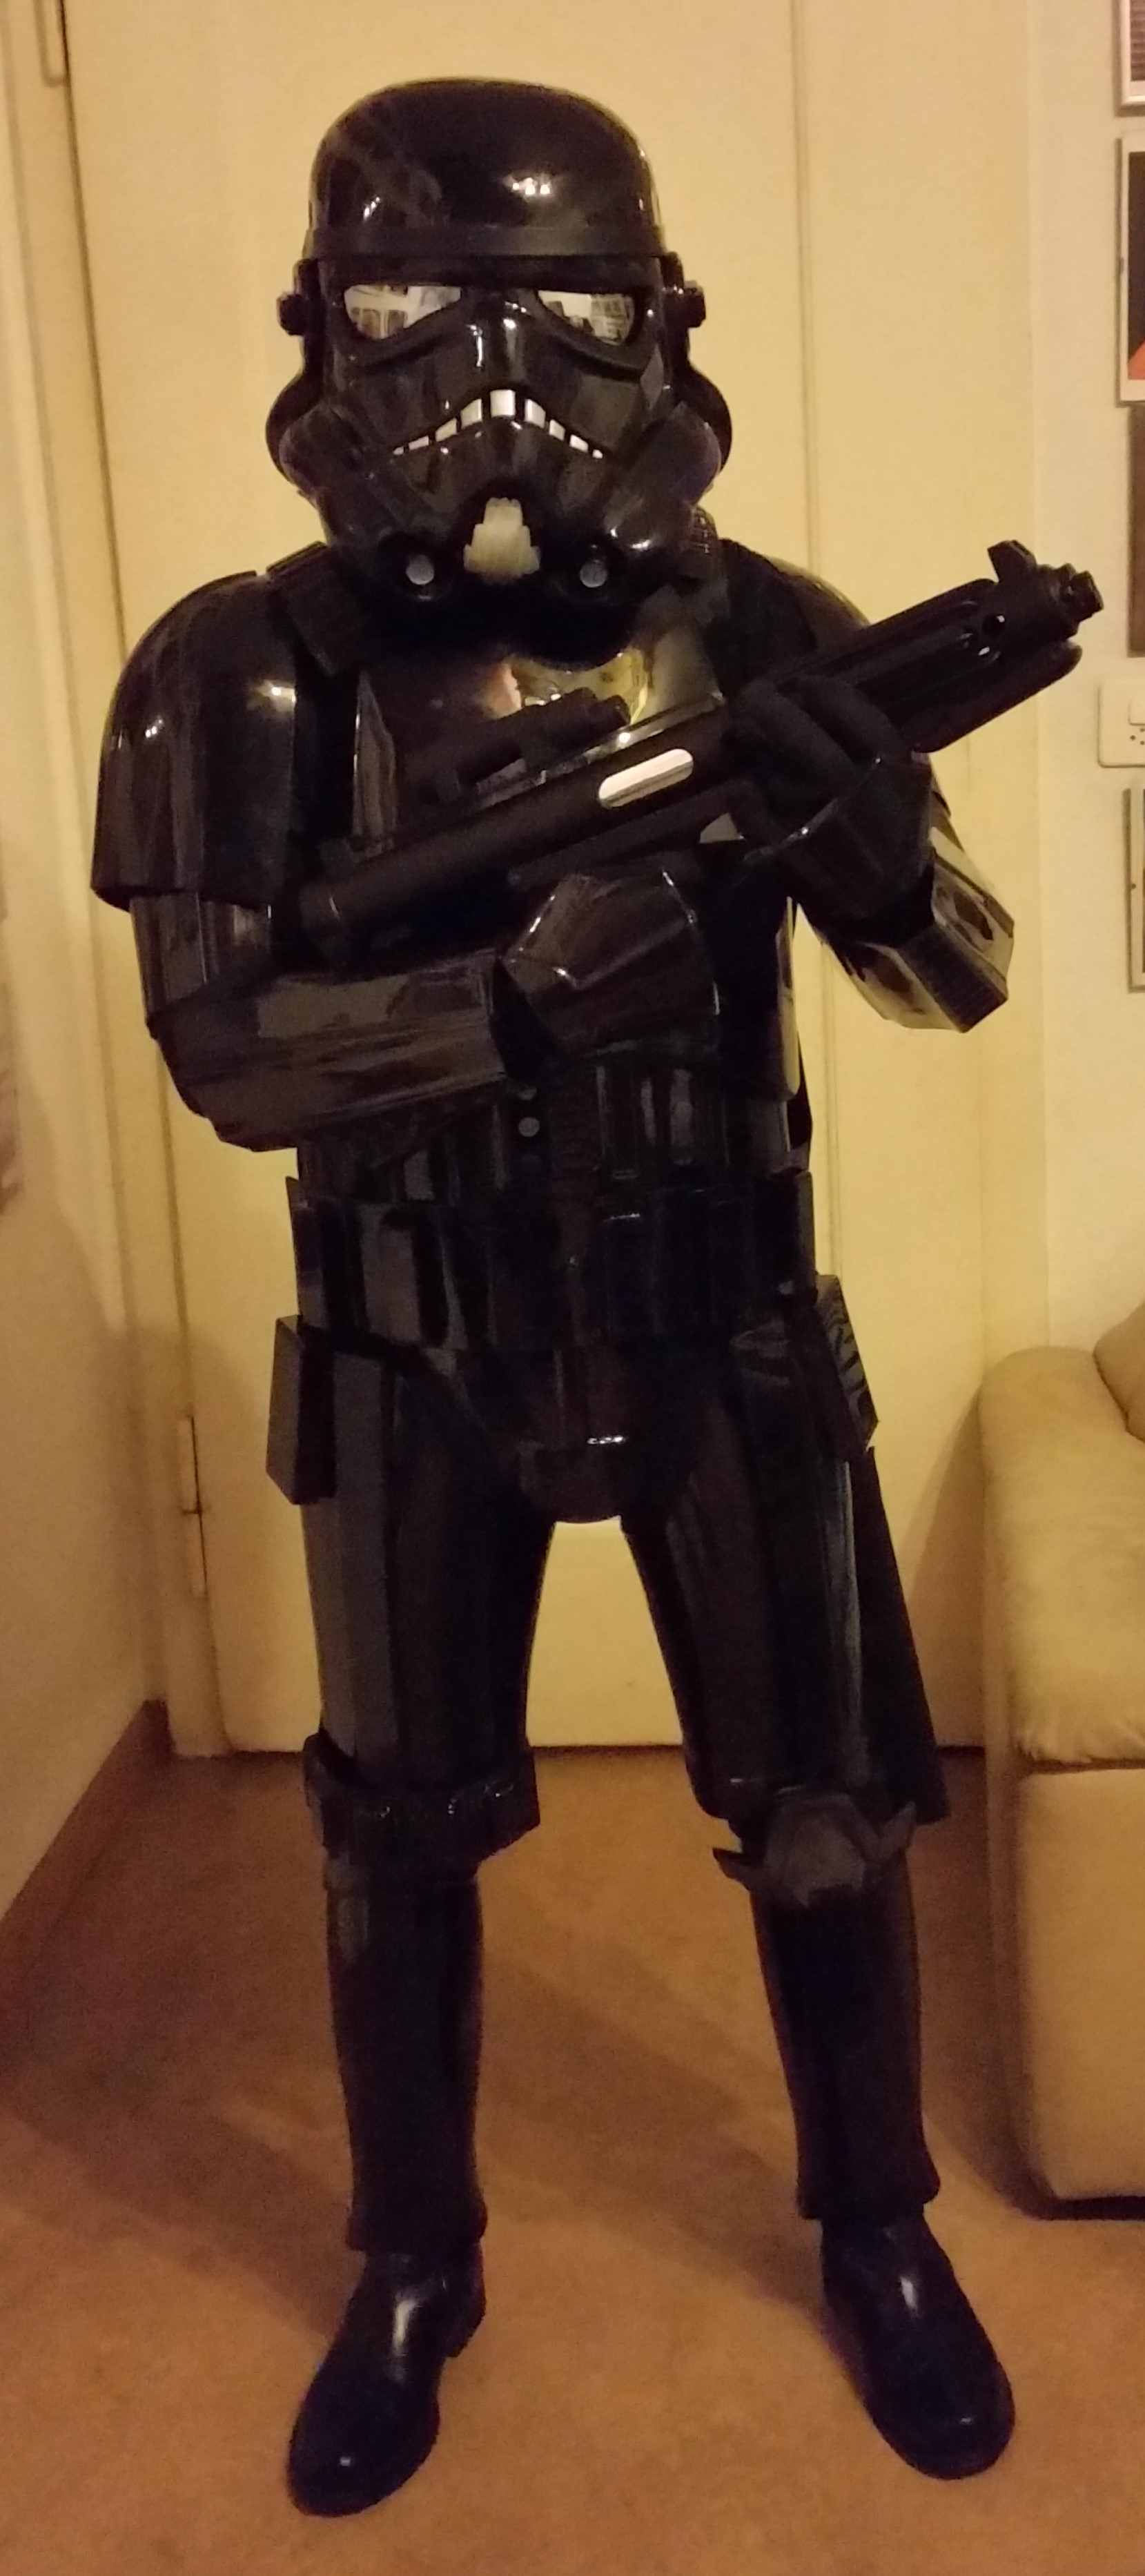 Rolf shadowtrooper black replacement armor costume review